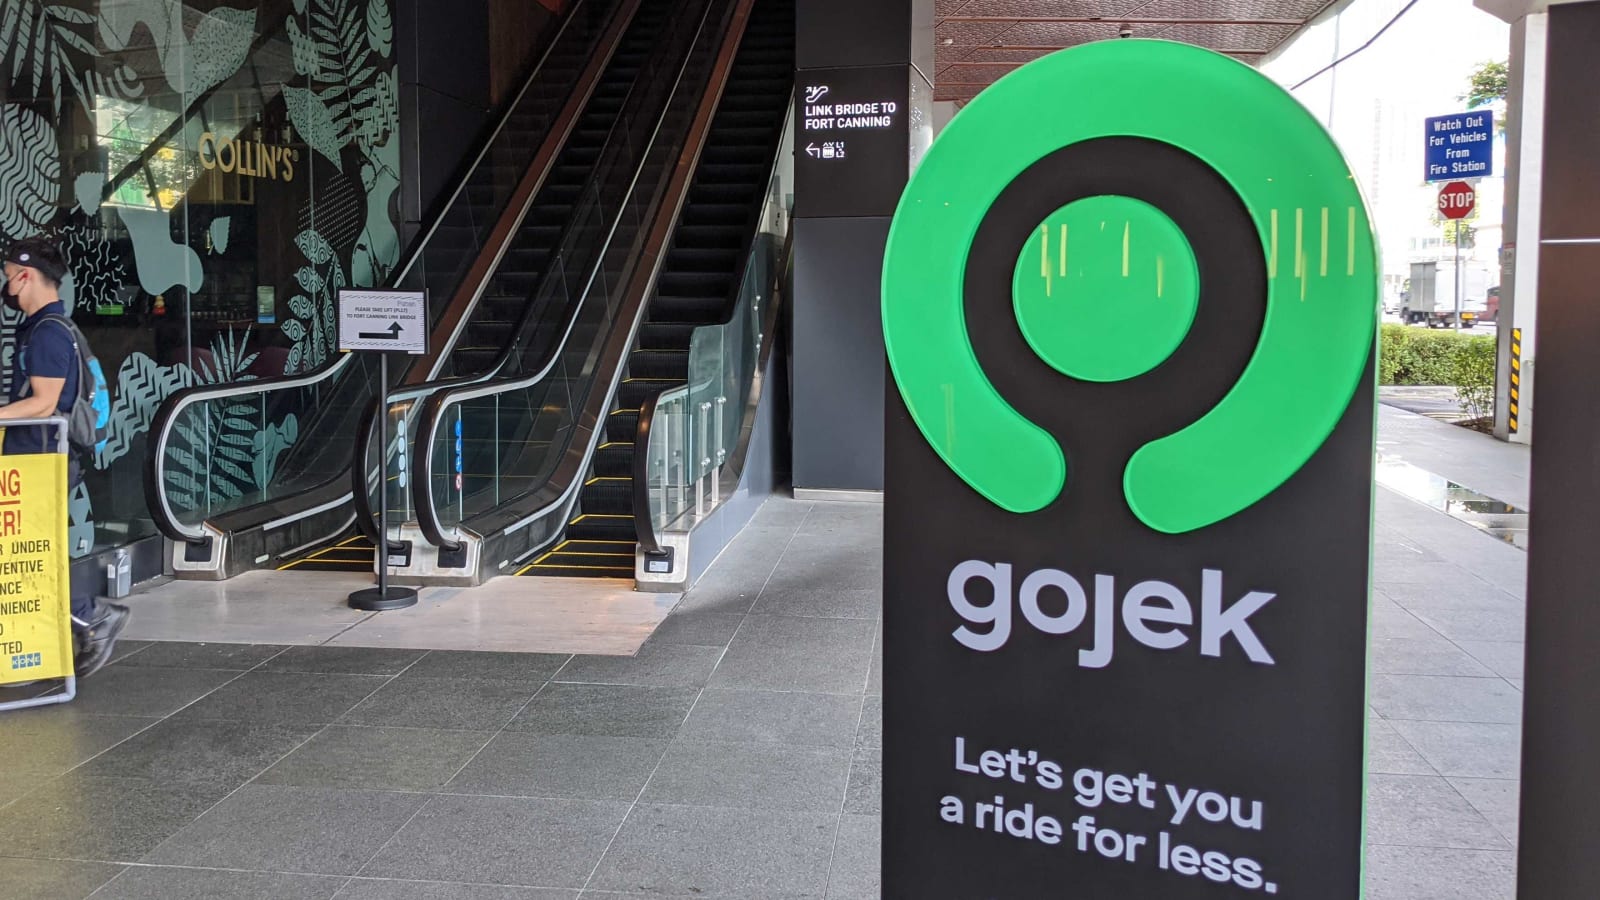 Gojek continuing to invest in Singapore, launching new services in ‘next few months’